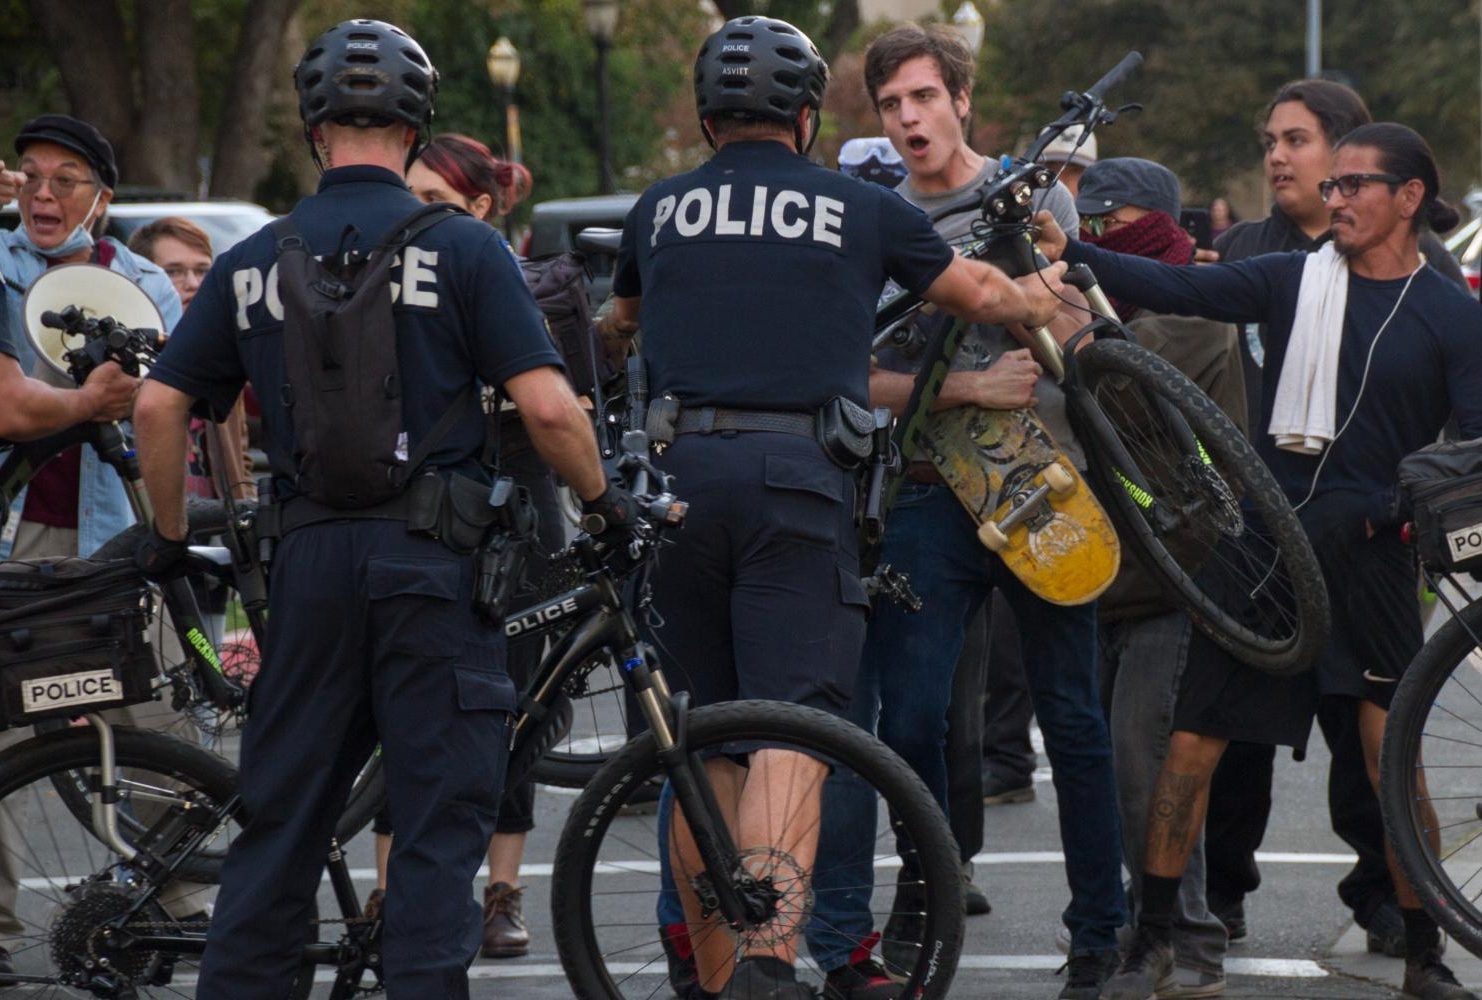 Sacramento Police use their bikes to push counter-protestors off the street during a “Turn California Red” conservative rally at the California State Capital on Nov. 4, 2018. (Photo by Patrick Hyun Wilson)